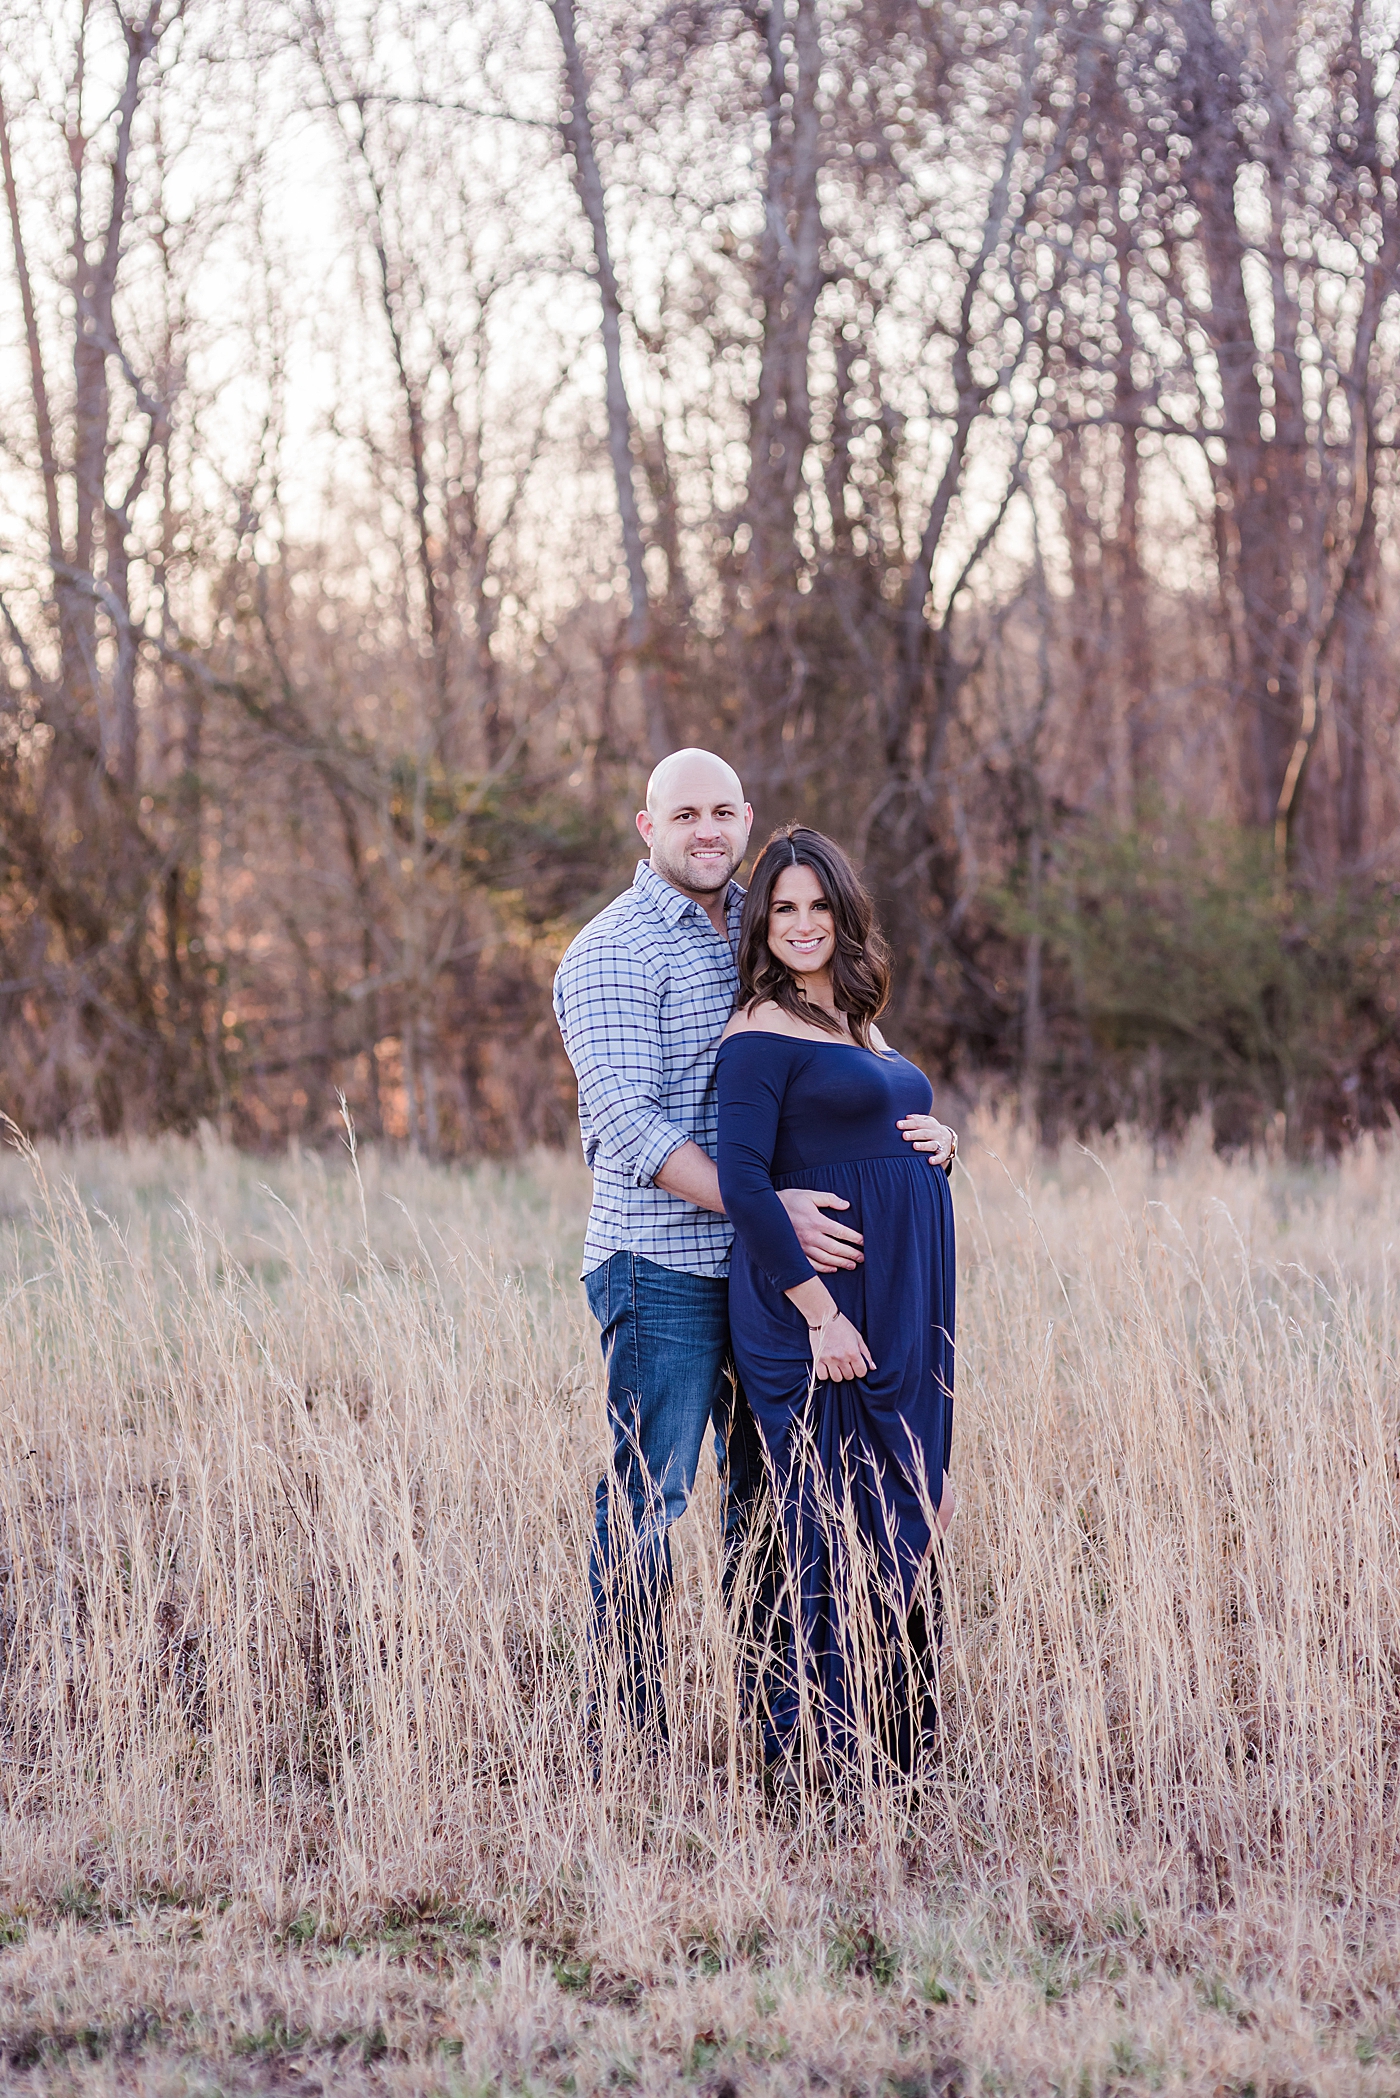 Mom and dad to be in blue in a field | Photo by Anna Wisjo Photography